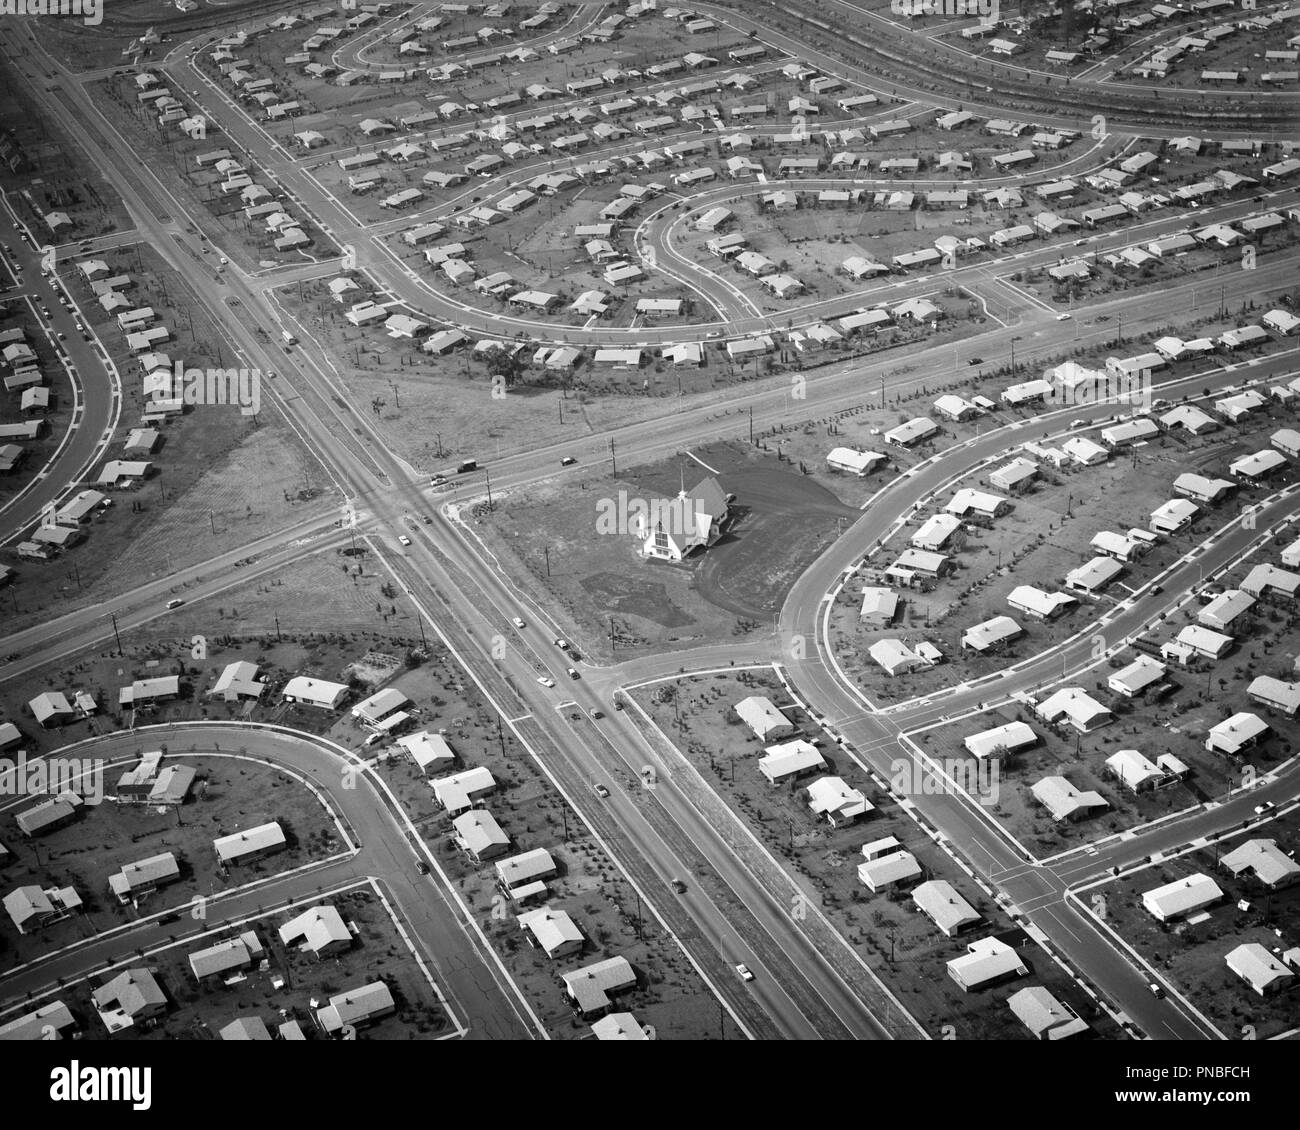 1950s AERIAL OF HOUSING DEVELOPMENT WITH CHURCH BEING BUILT ON CENTRAL INTERSECTION LEVITTOWN PENNSYLVANIA USA - a59 KRU001 HARS OLD FASHIONED Stock Photo